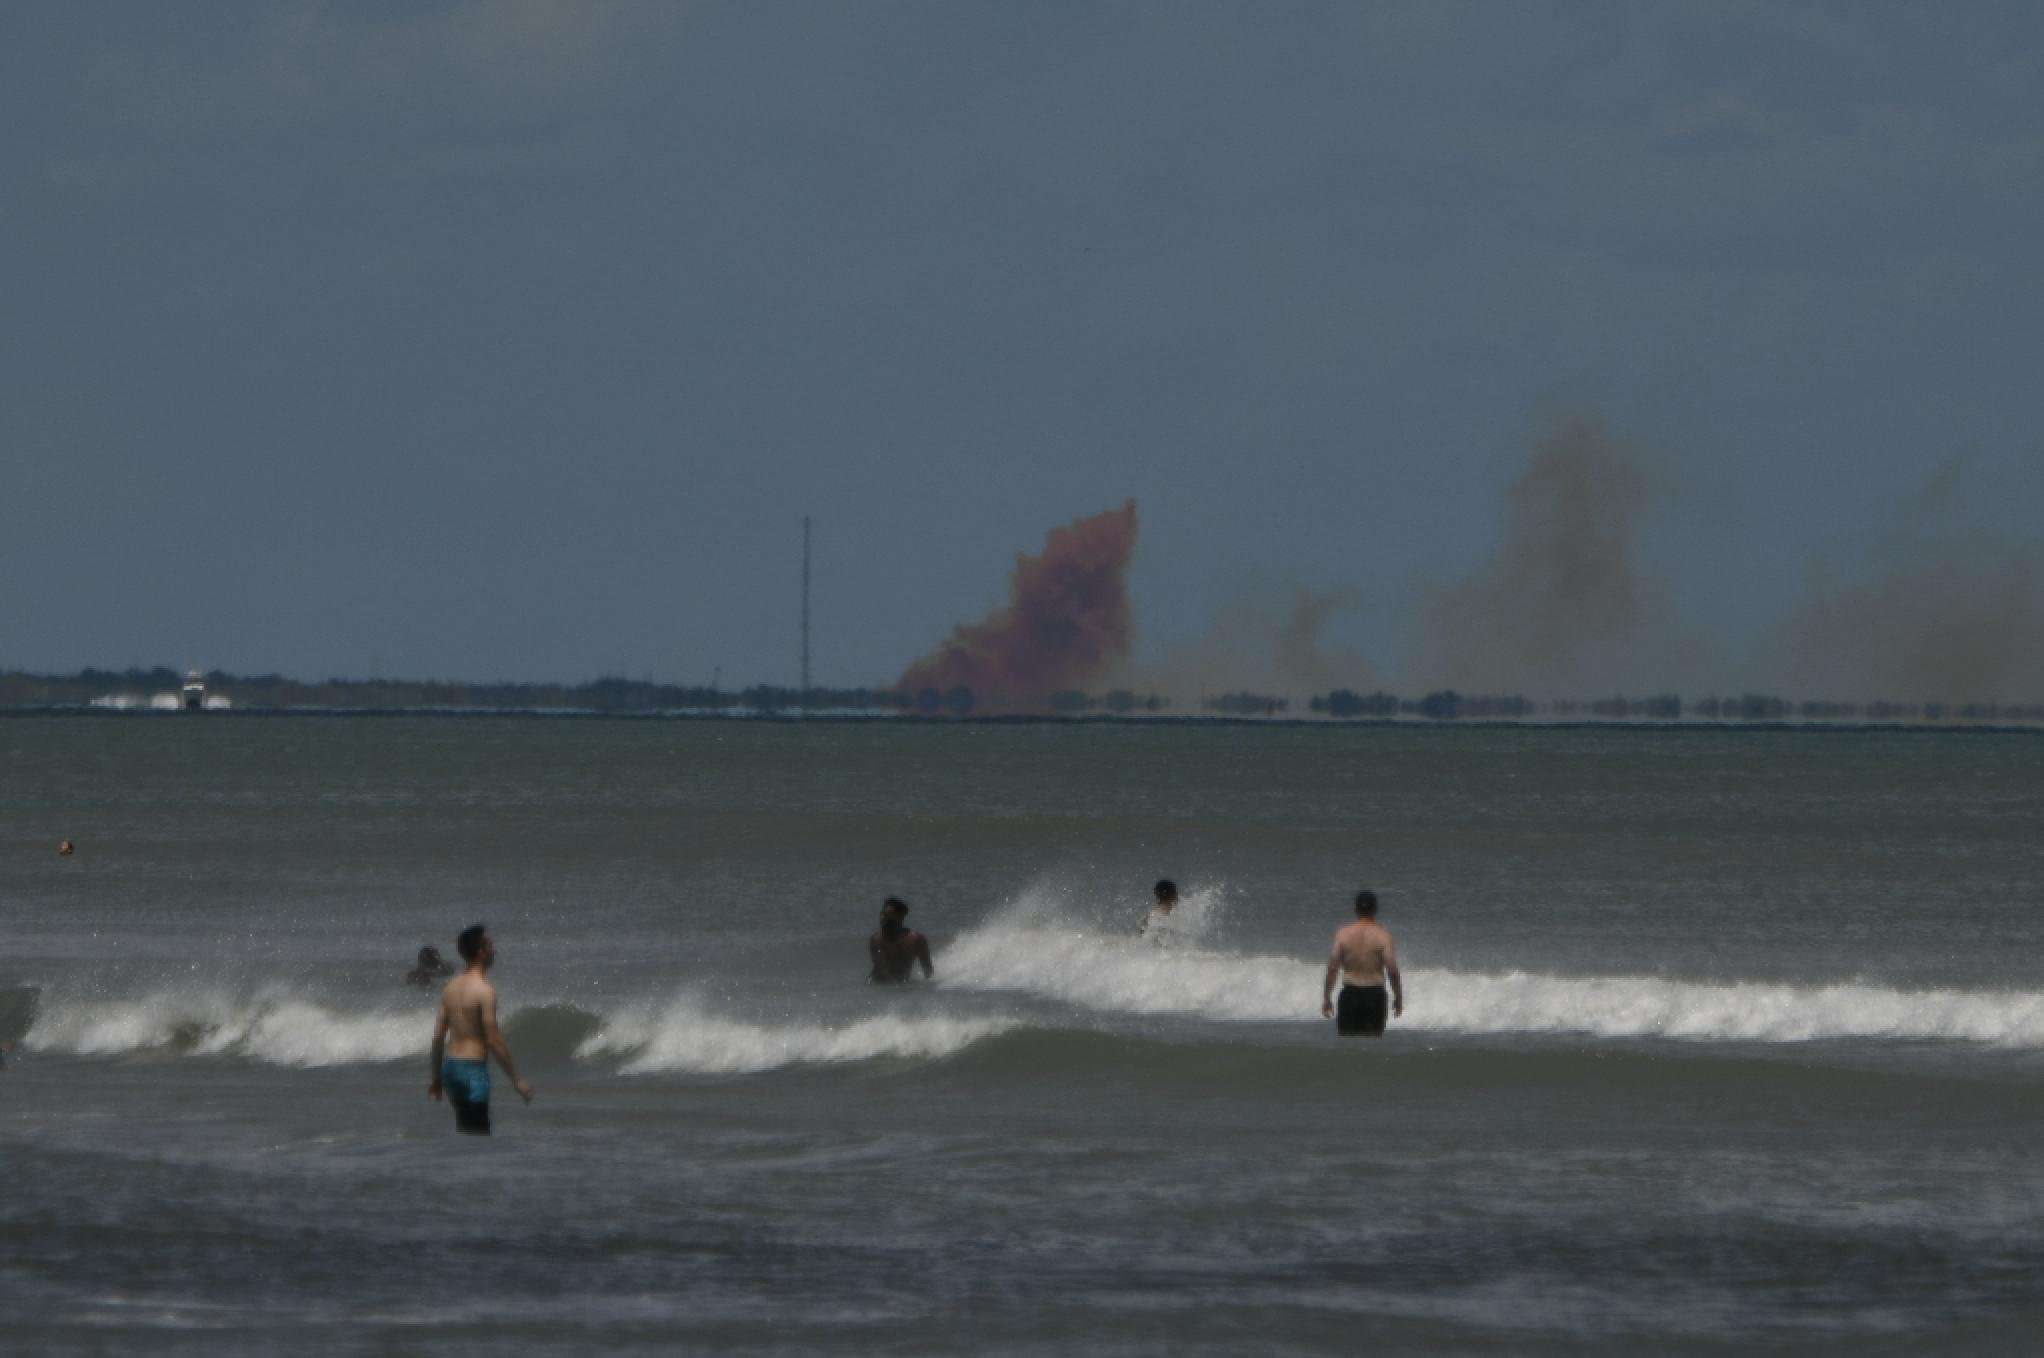 image for Emre Kelly auf Twitter: "BREAKING: #SpaceX Crew Dragon suffered an anomaly during test fire today, according to 45th Space Wing. Smoke could be seen on the beaches. "On April 20, an anomaly occurred a